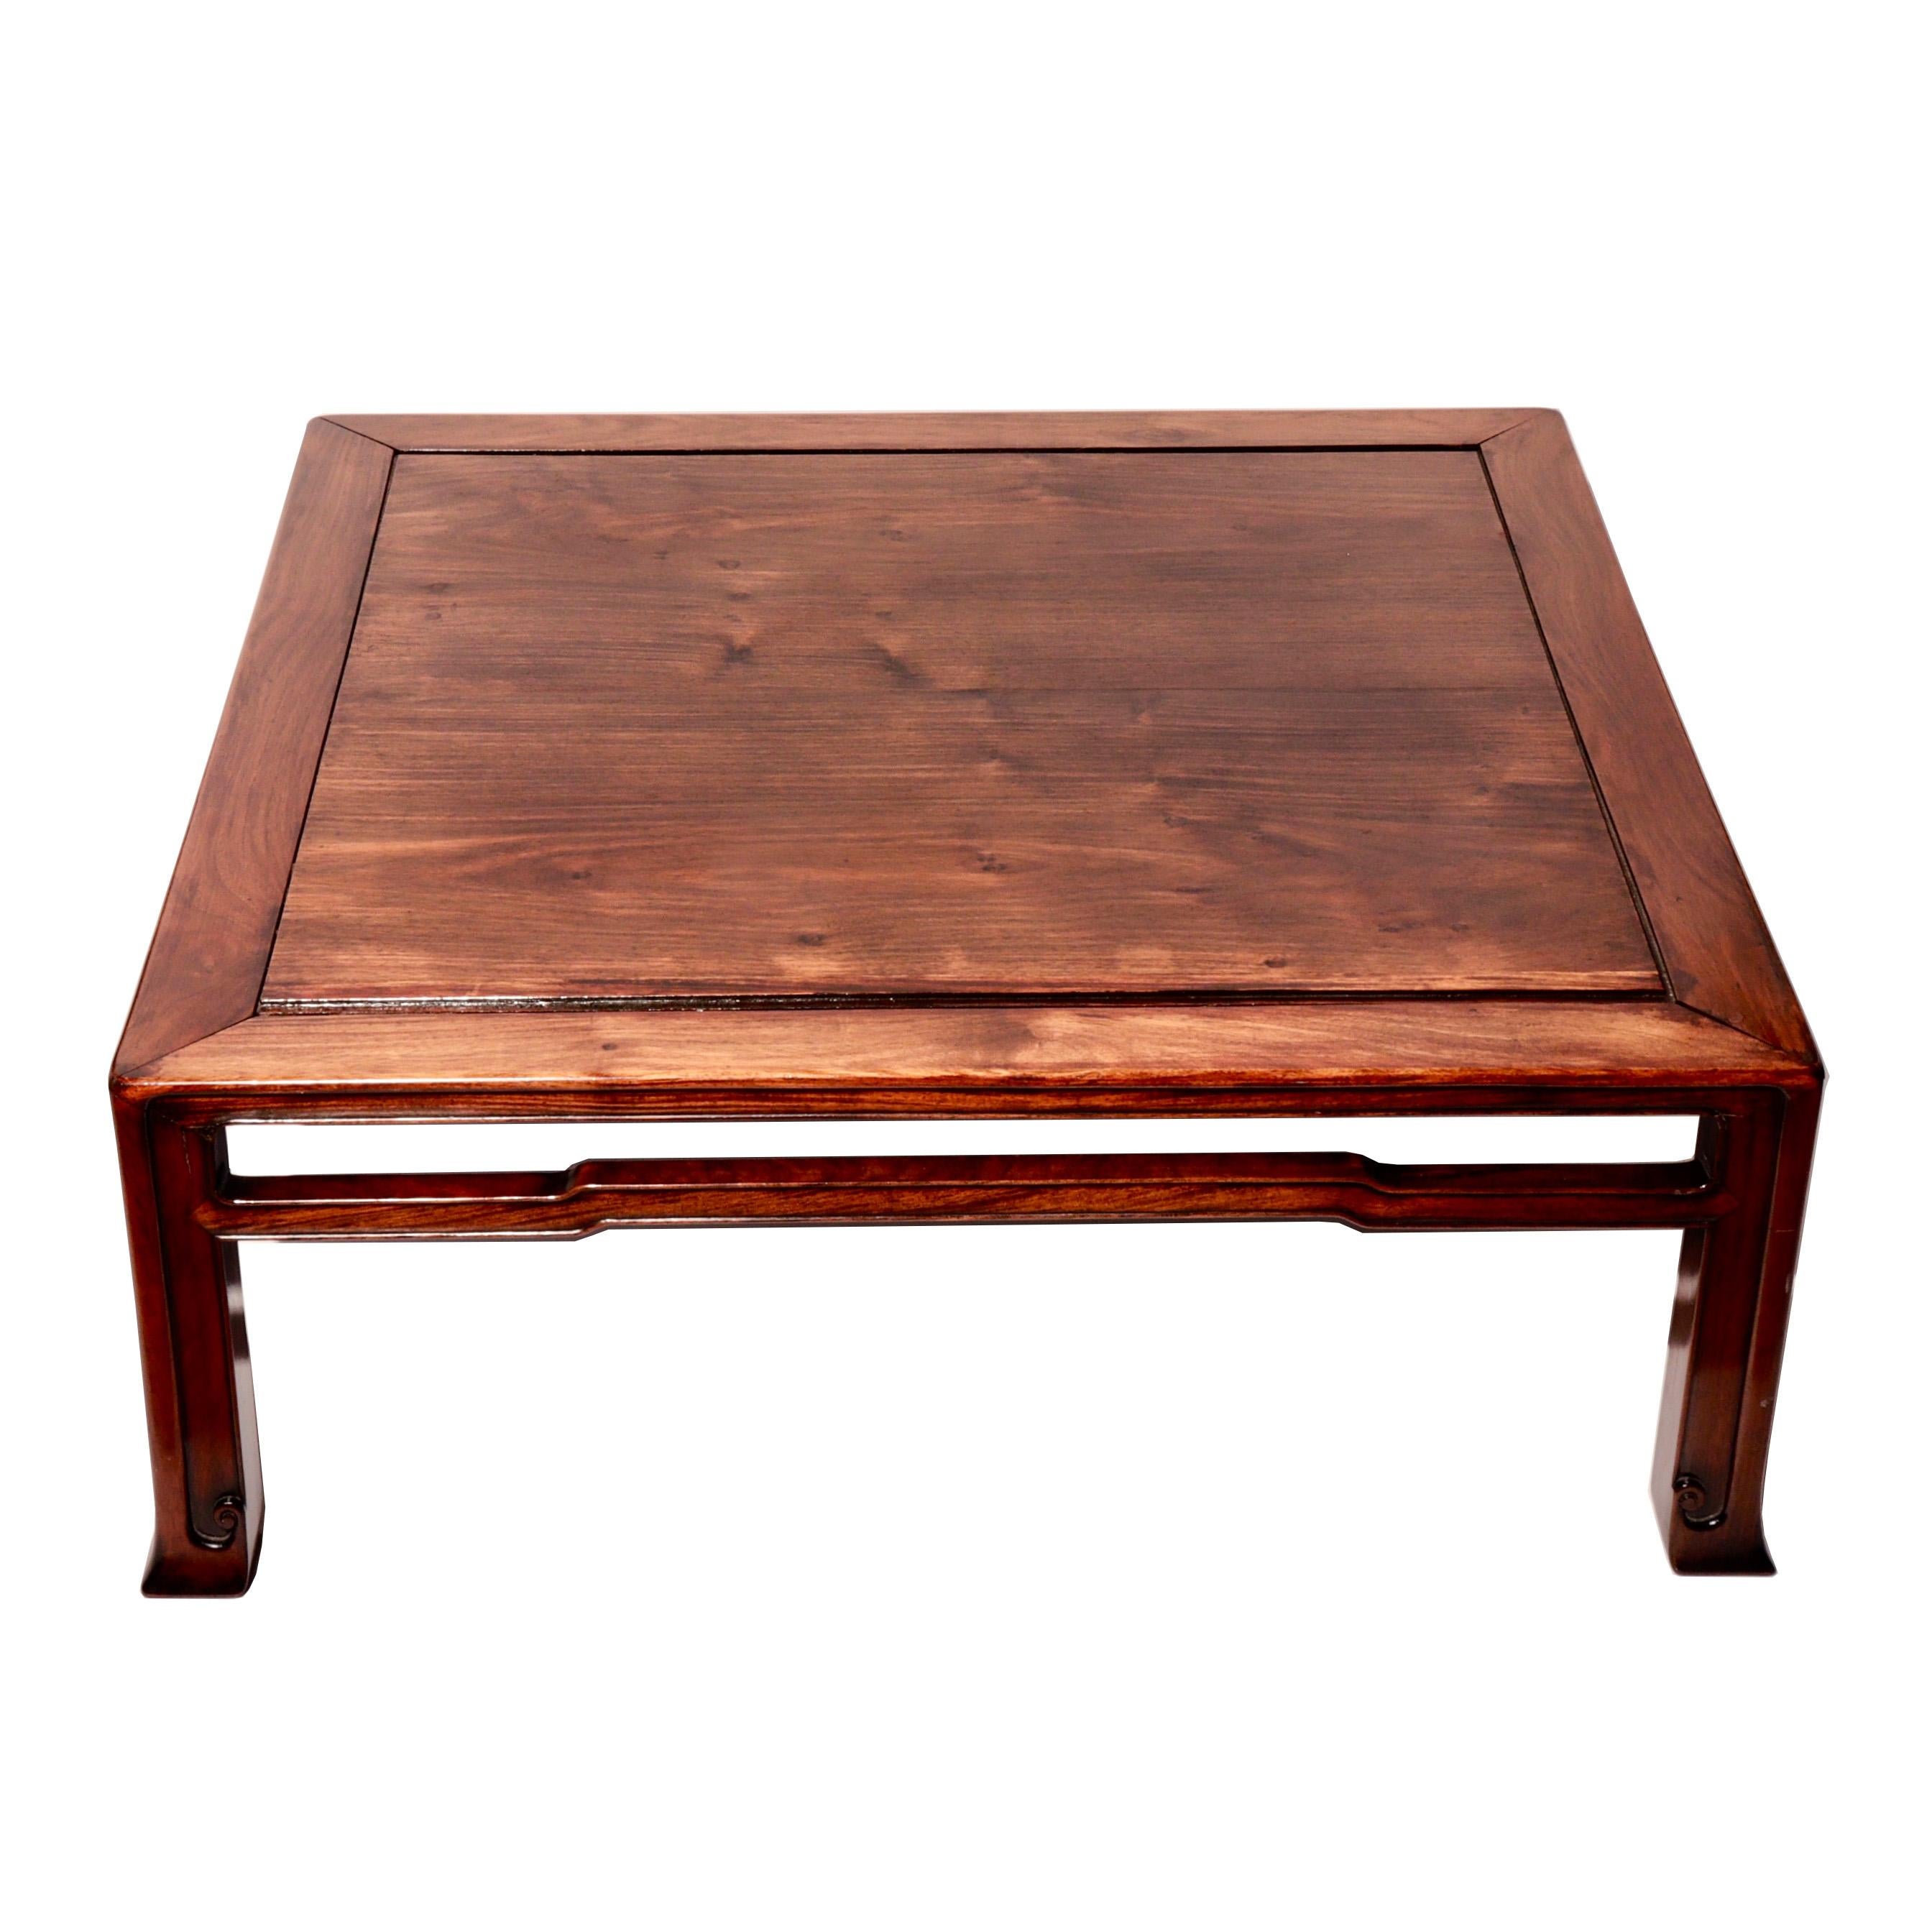 Early 20th Century Japanese Rosewood Square Tea Table For Sale